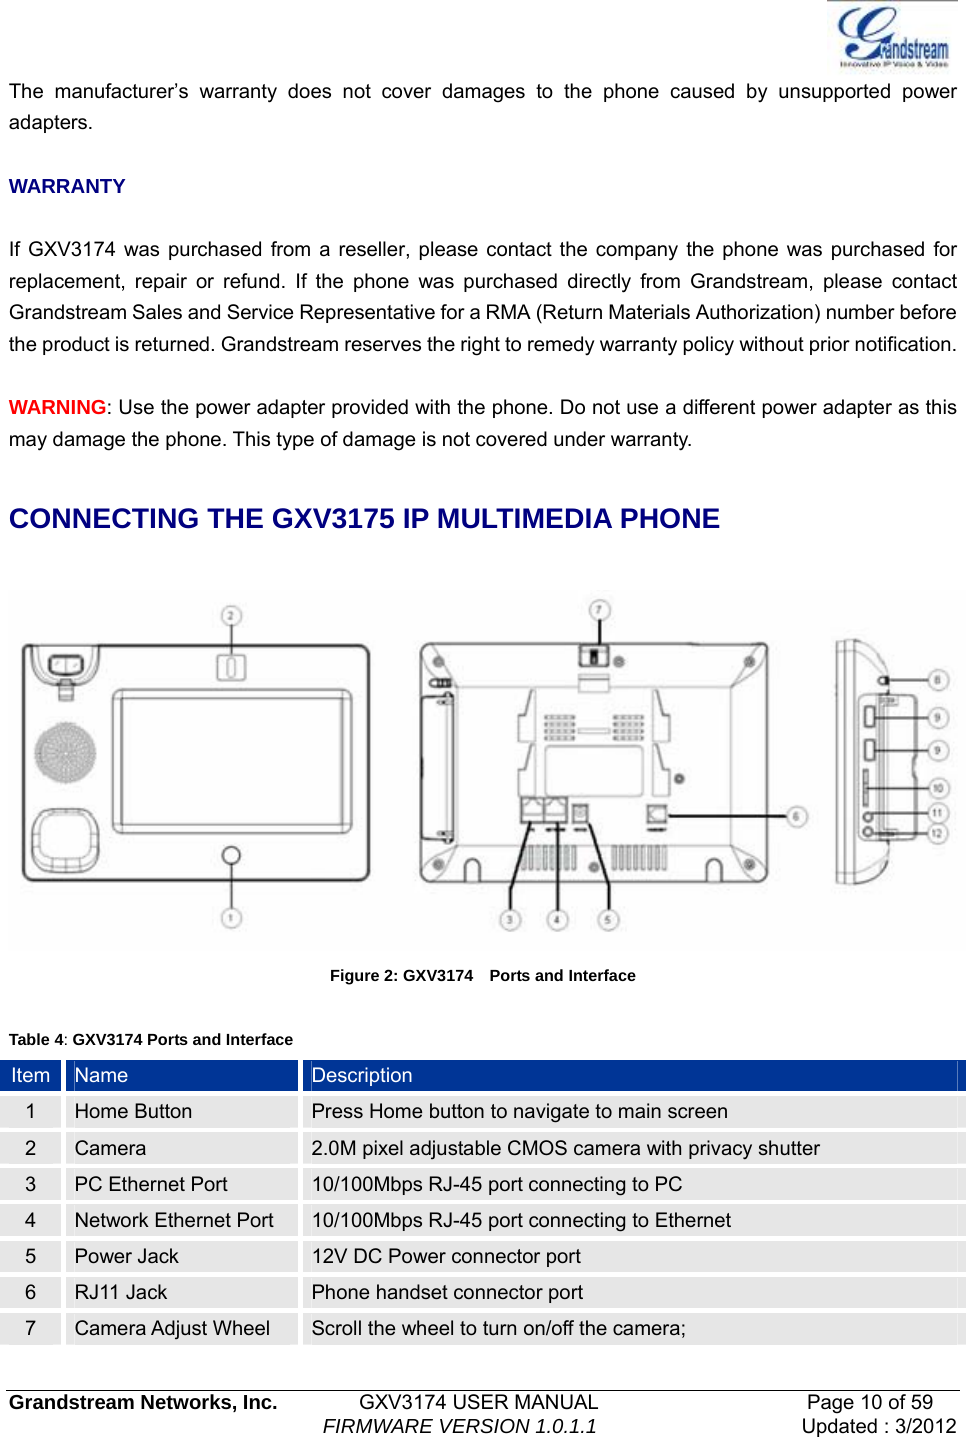   Grandstream Networks, Inc.        GXV3174 USER MANUAL                     Page 10 of 59                                FIRMWARE VERSION 1.0.1.1  Updated : 3/2012  The manufacturer’s warranty does not cover damages to the phone caused by unsupported power adapters.  WARRANTY  If GXV3174 was purchased from a reseller, please contact the company the phone was purchased for replacement, repair or refund. If the phone was purchased directly from Grandstream, please contact Grandstream Sales and Service Representative for a RMA (Return Materials Authorization) number before the product is returned. Grandstream reserves the right to remedy warranty policy without prior notification.  WARNING: Use the power adapter provided with the phone. Do not use a different power adapter as this may damage the phone. This type of damage is not covered under warranty.  CONNECTING THE GXV3175 IP MULTIMEDIA PHONE   Figure 2: GXV3174    Ports and Interface  Table 4: GXV3174 Ports and Interface Item  Name  Description 1  Home Button  Press Home button to navigate to main screen 2  Camera  2.0M pixel adjustable CMOS camera with privacy shutter 3  PC Ethernet Port  10/100Mbps RJ-45 port connecting to PC 4  Network Ethernet Port  10/100Mbps RJ-45 port connecting to Ethernet 5  Power Jack  12V DC Power connector port 6  RJ11 Jack  Phone handset connector port 7  Camera Adjust Wheel  Scroll the wheel to turn on/off the camera; 